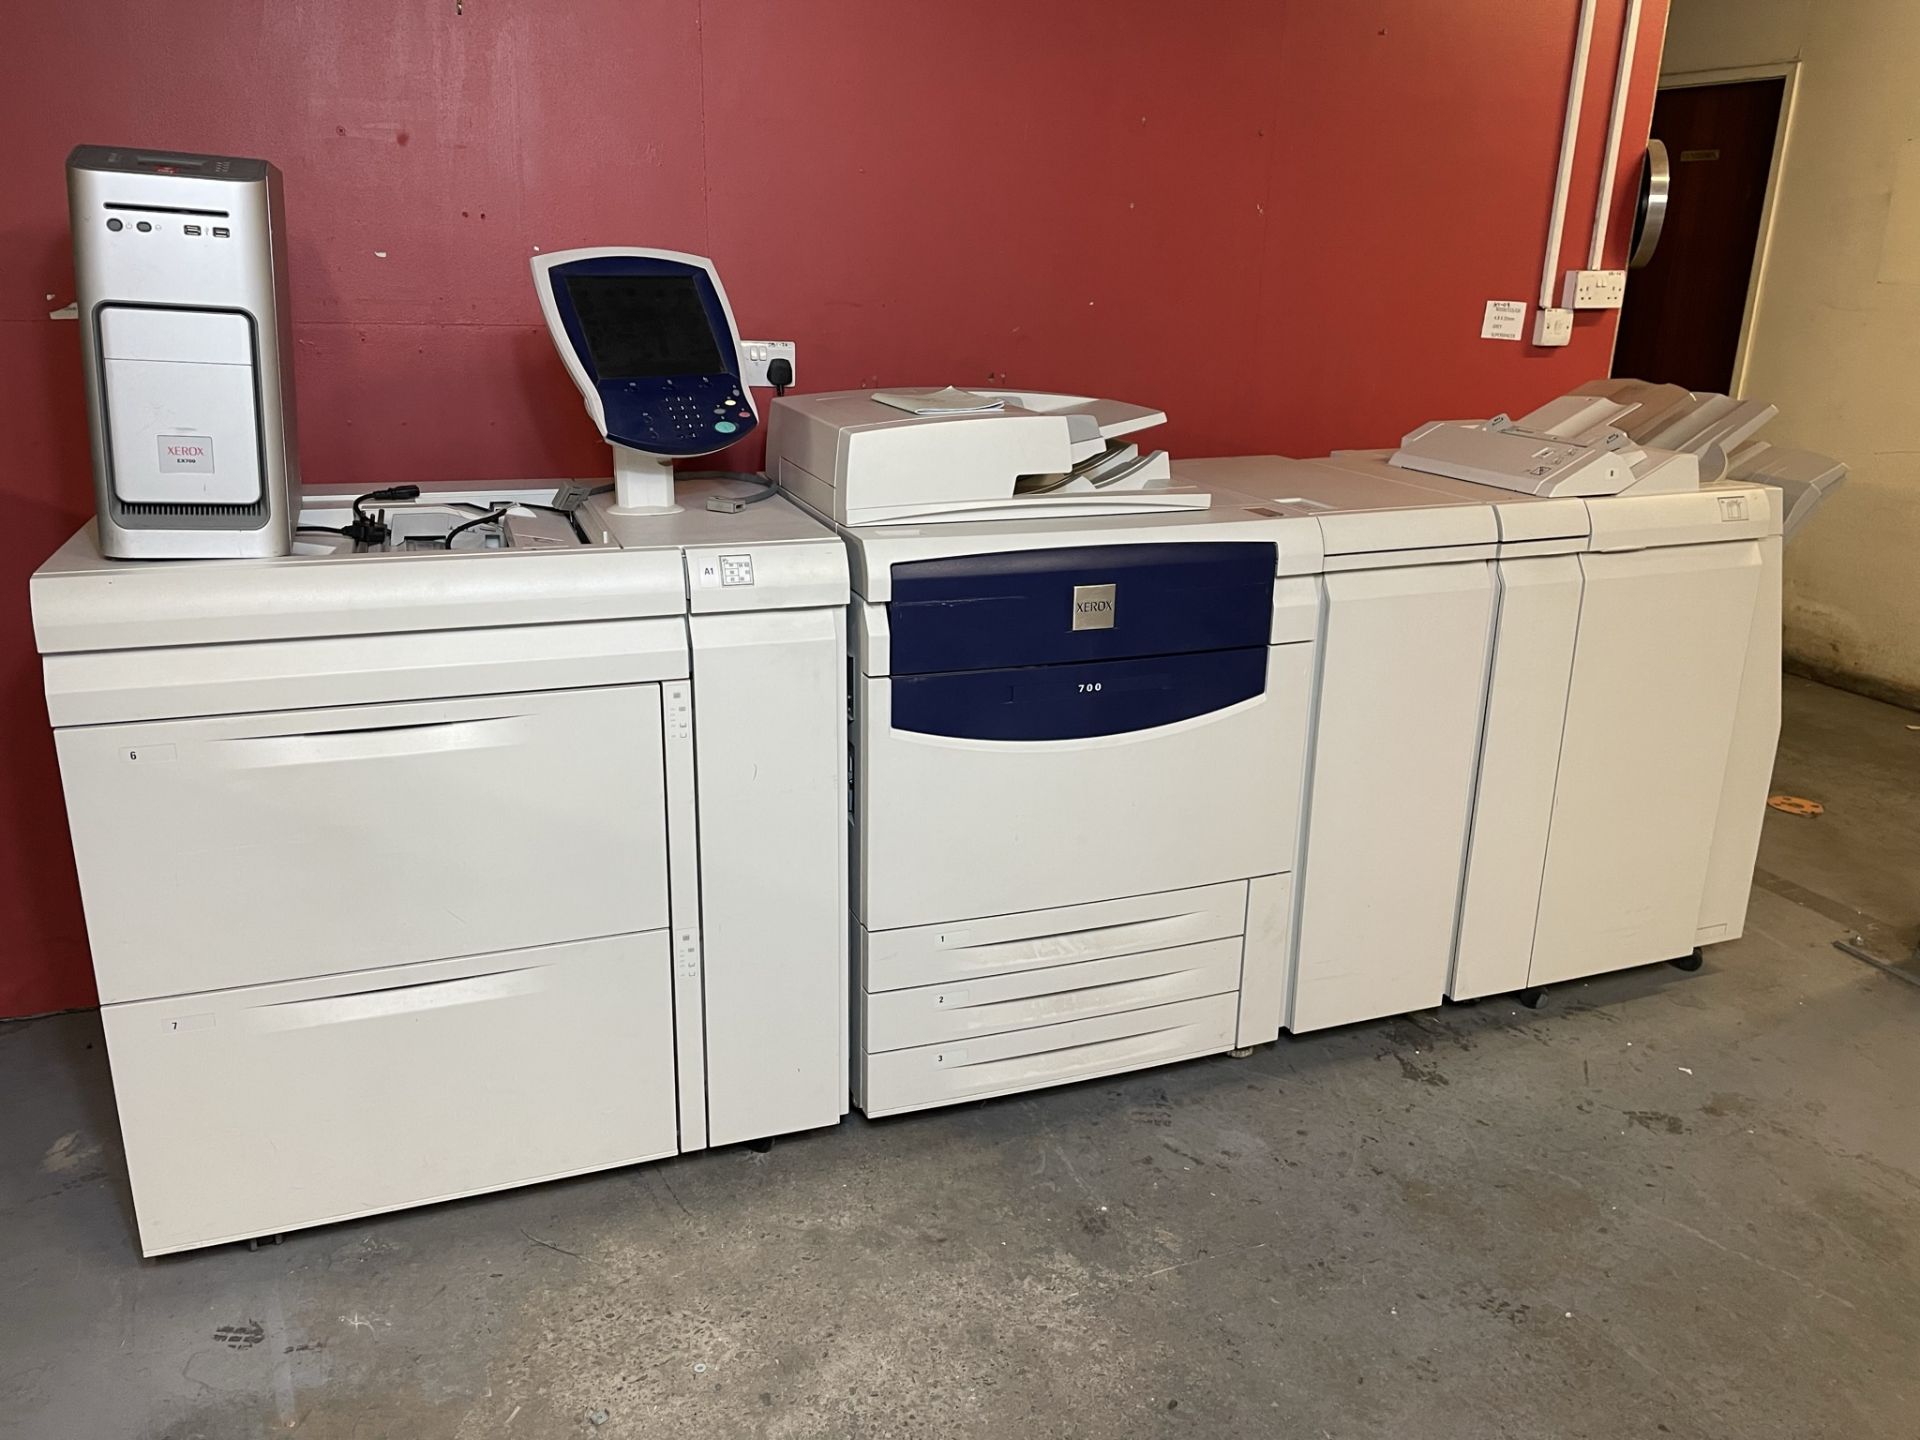 Xerox 700 Digital Colour Press w/ Suction Feeder, Paper Feeder & Fiery Controller - Image 2 of 9